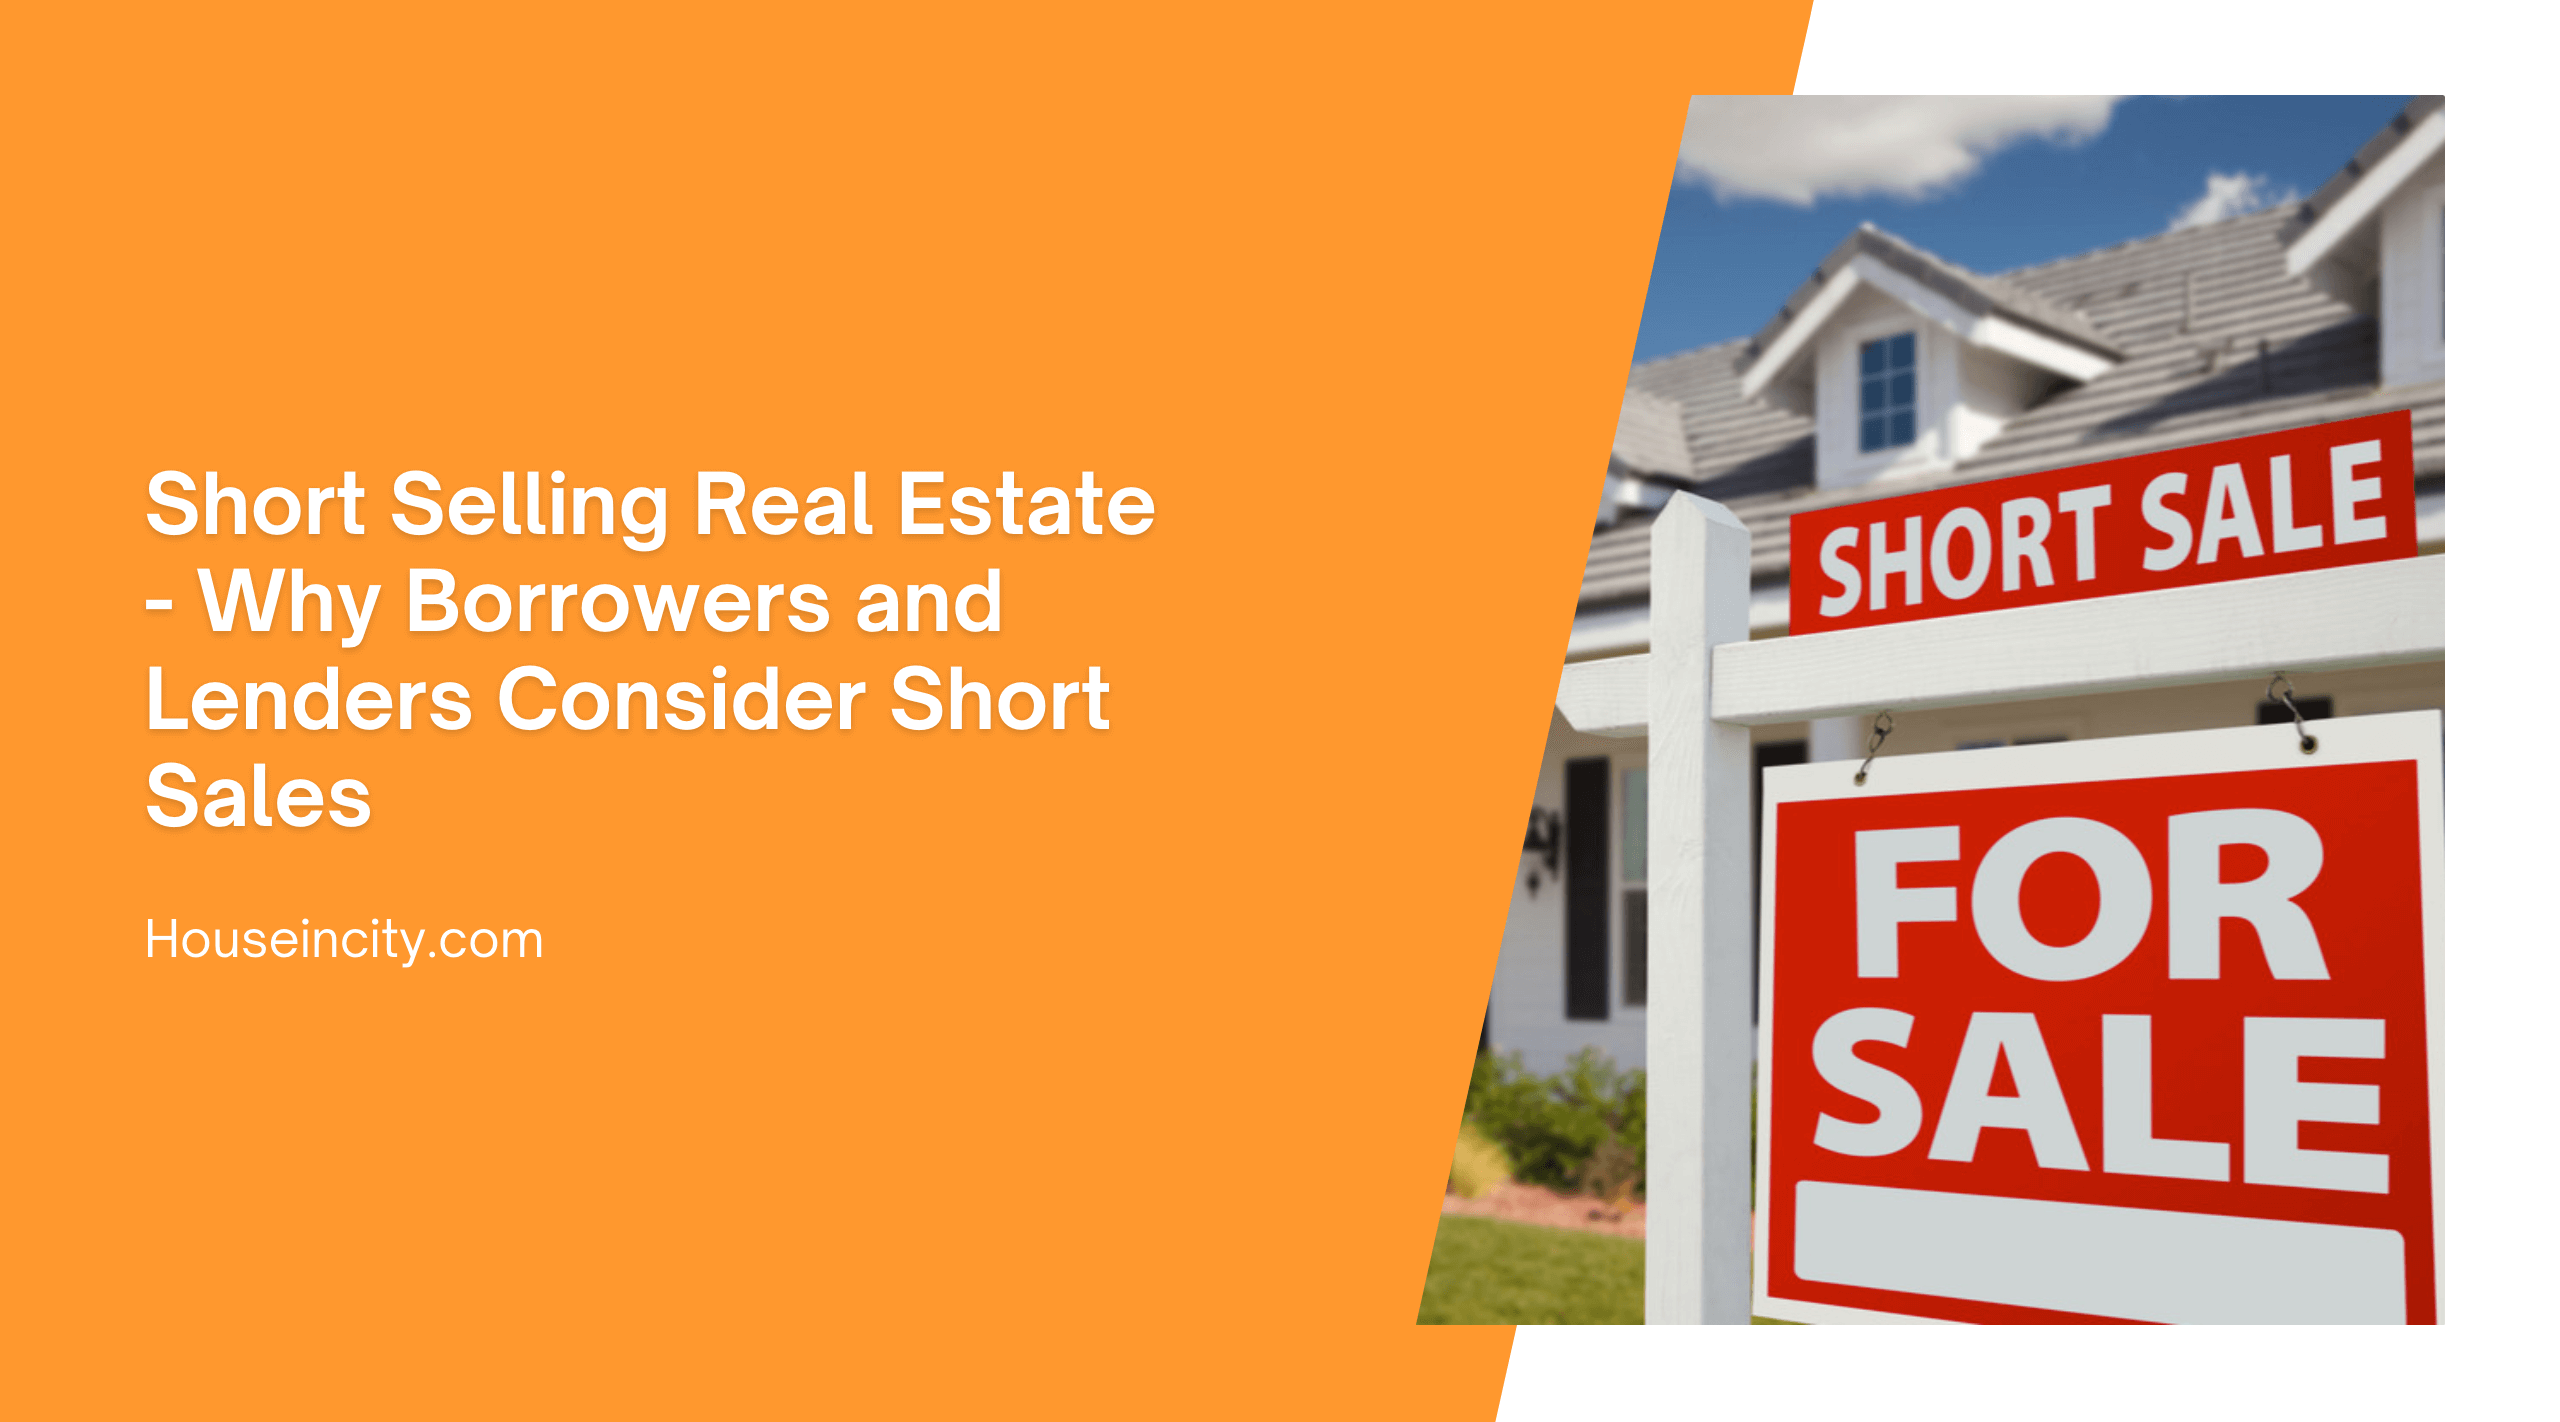 Short Selling Real Estate - Why Borrowers and Lenders Consider Short Sales